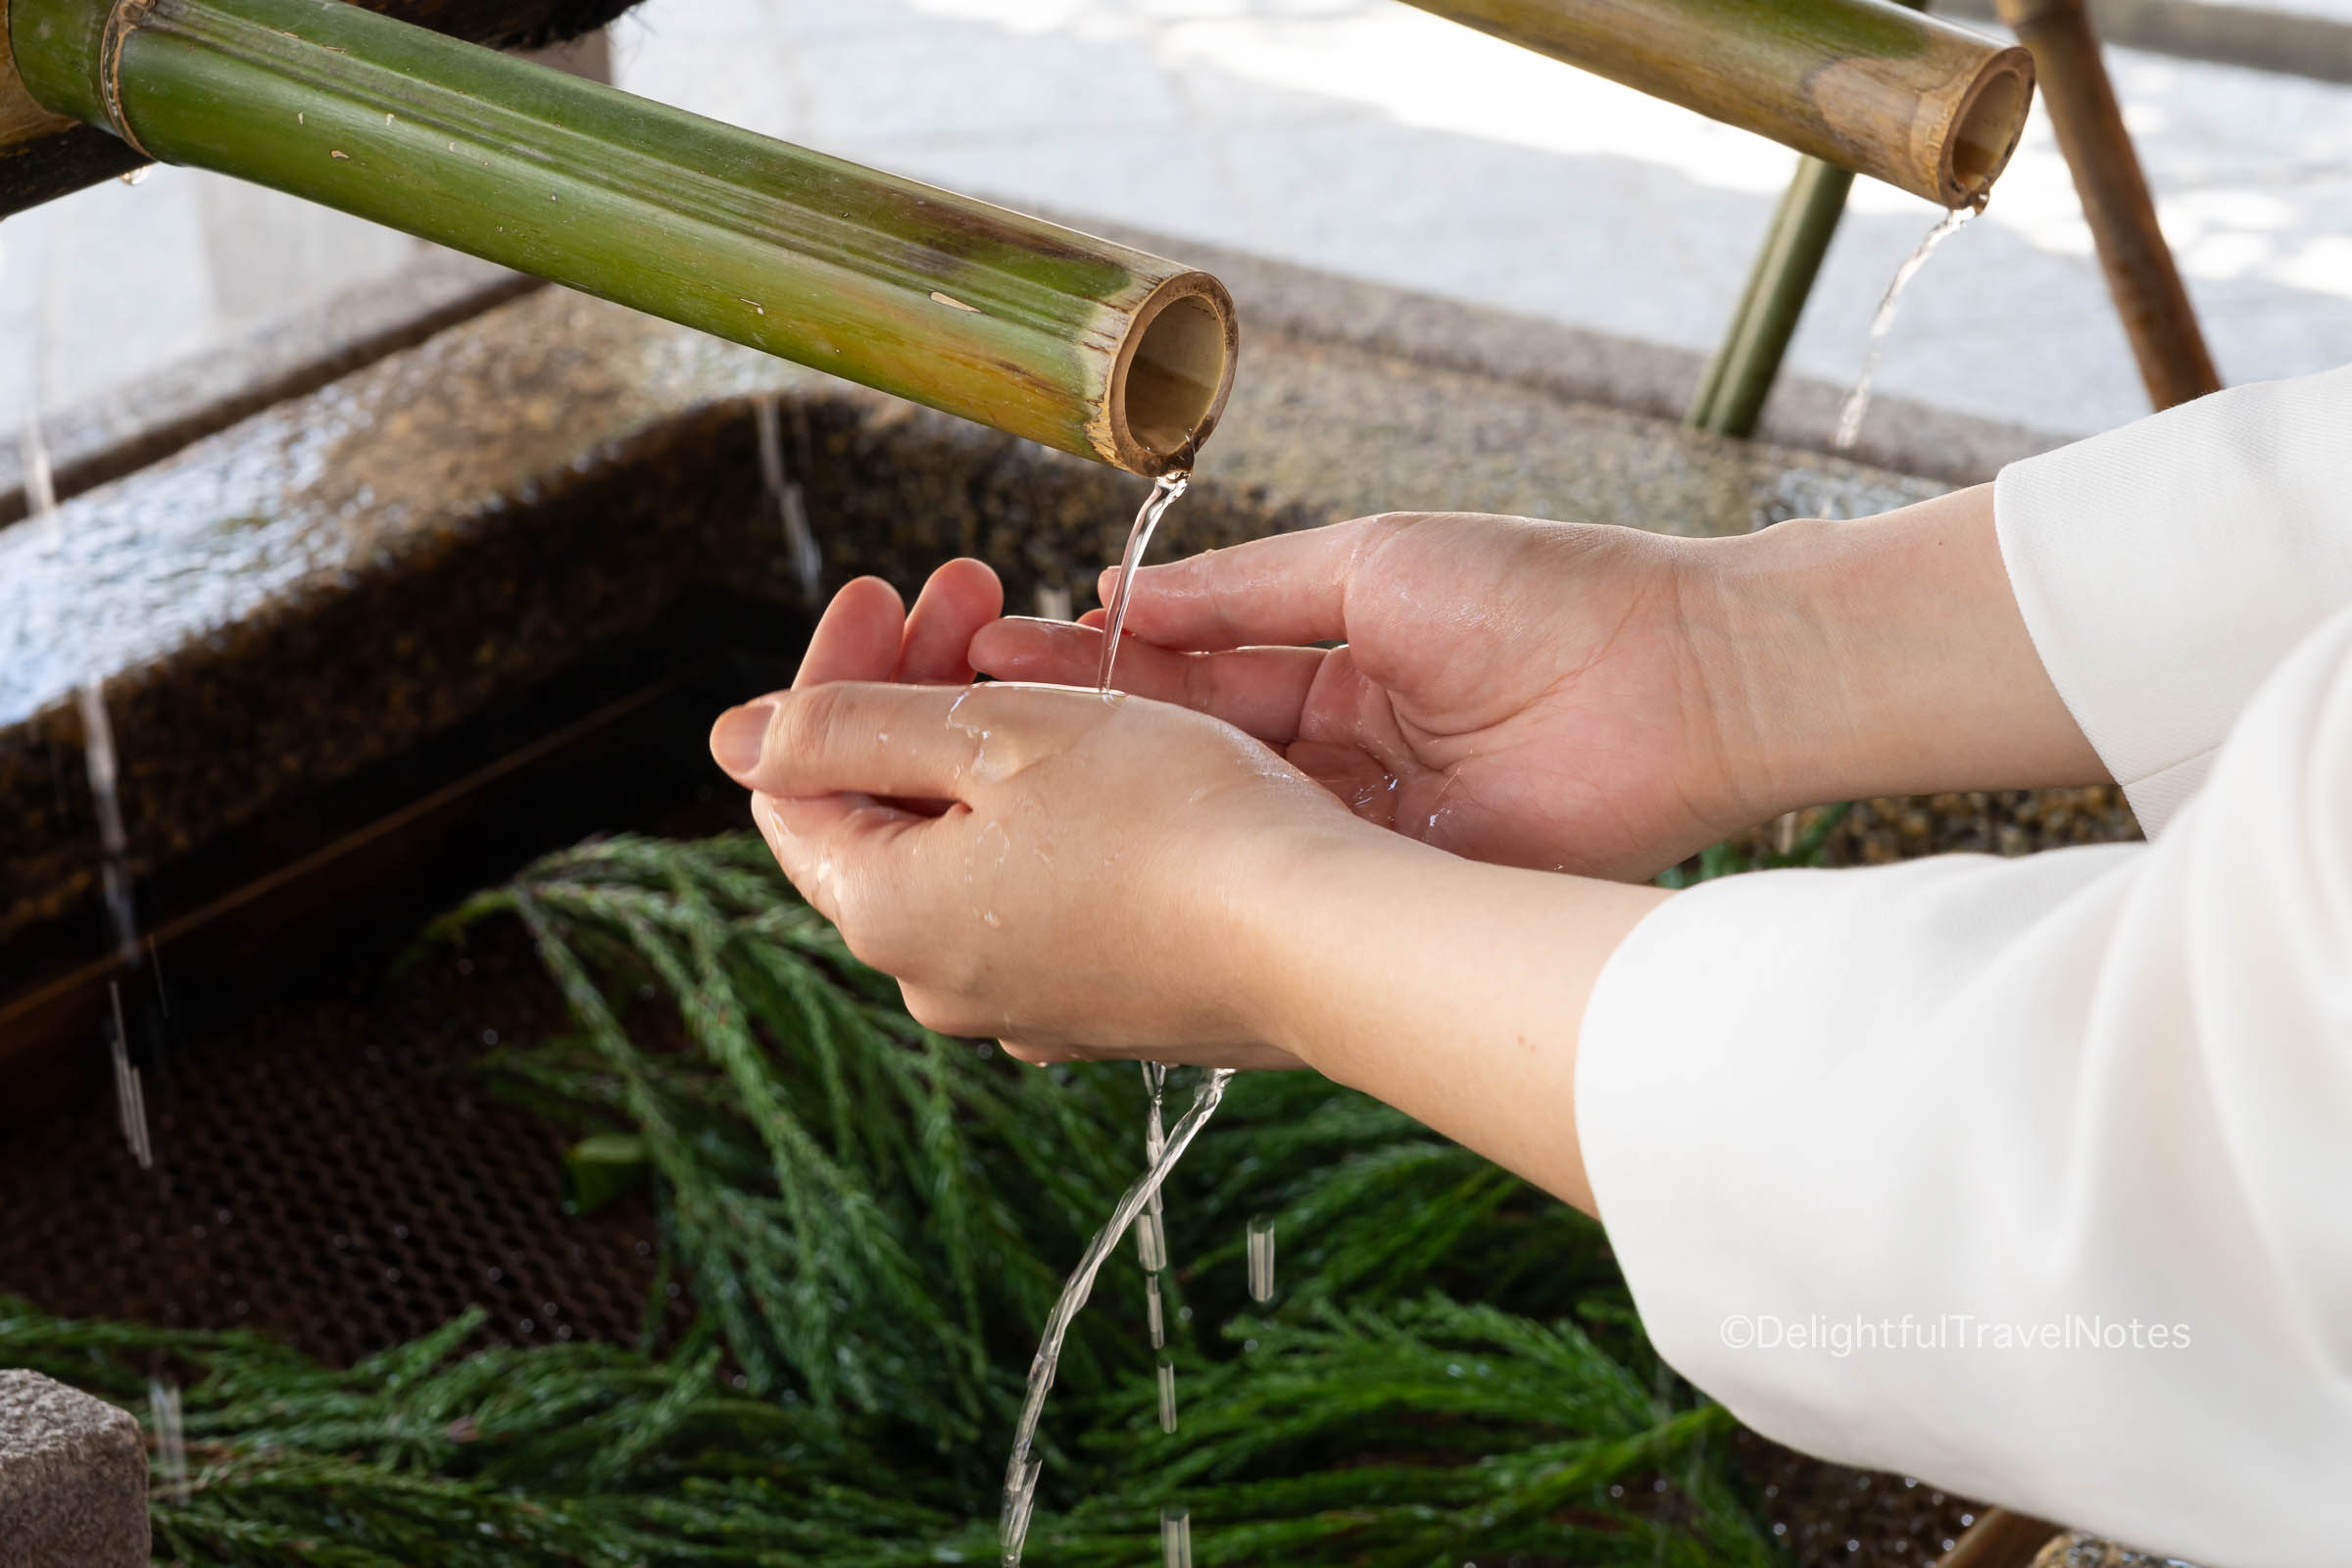 rinsing hands with water flowing from bamboo pipes to purify at Japanese temples and shrines